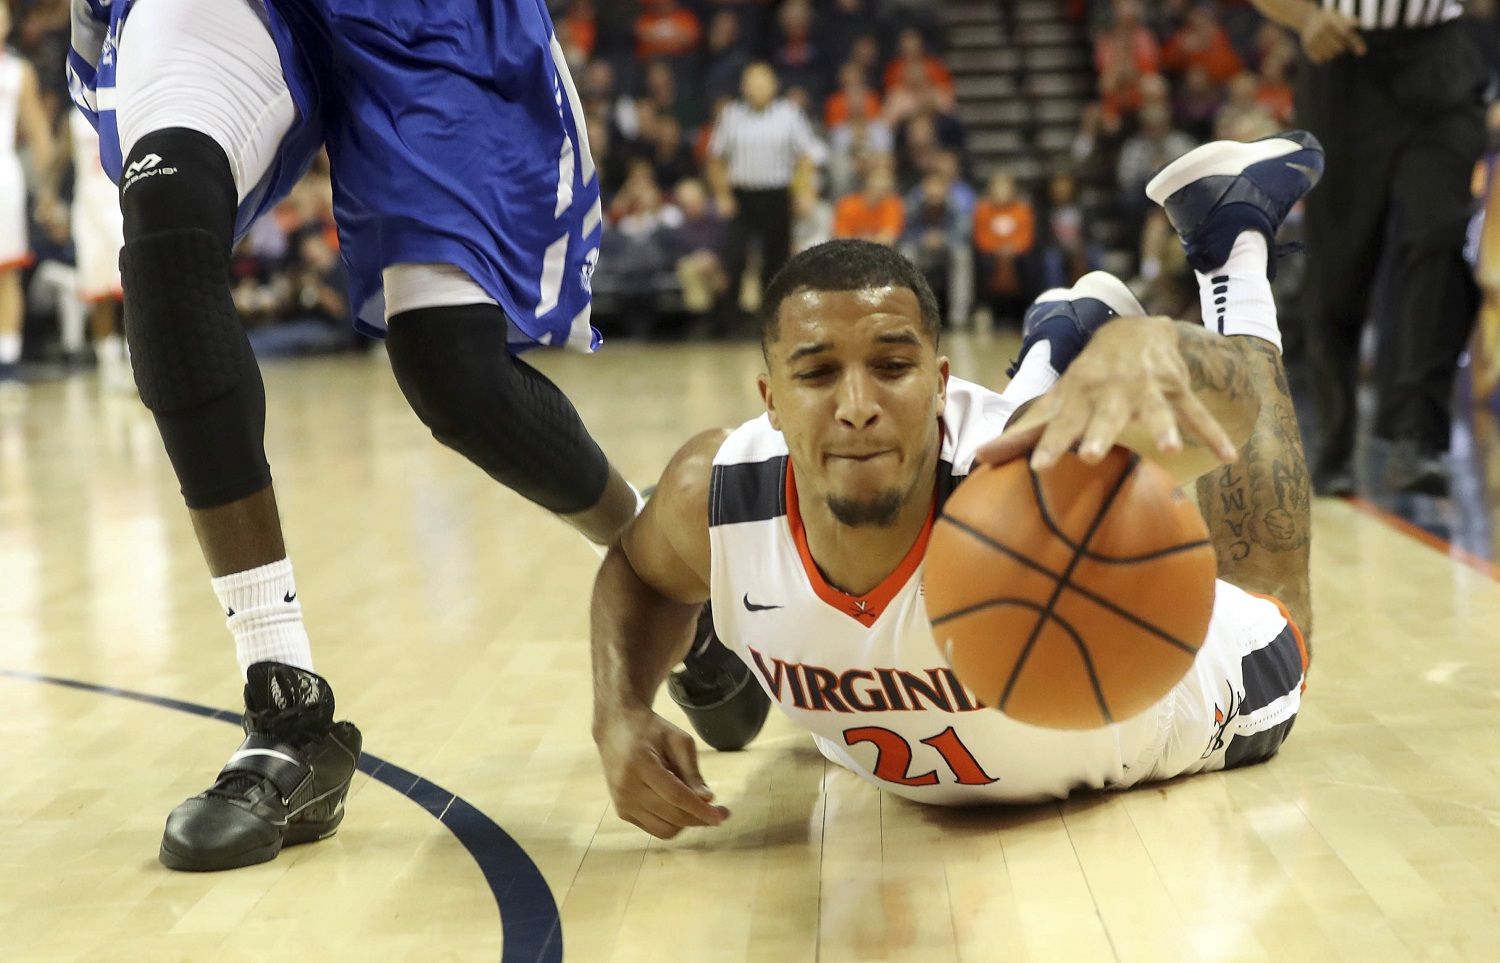 Virginia forward Isaiah Wilkins (21) reaches for a loose ball next to Hampton guard Malique Trent during an NCAA college basketball game Friday, Dec. 22, 2017, in Charlottesville, Va. (AP Photo/Andrew Shurtleff)